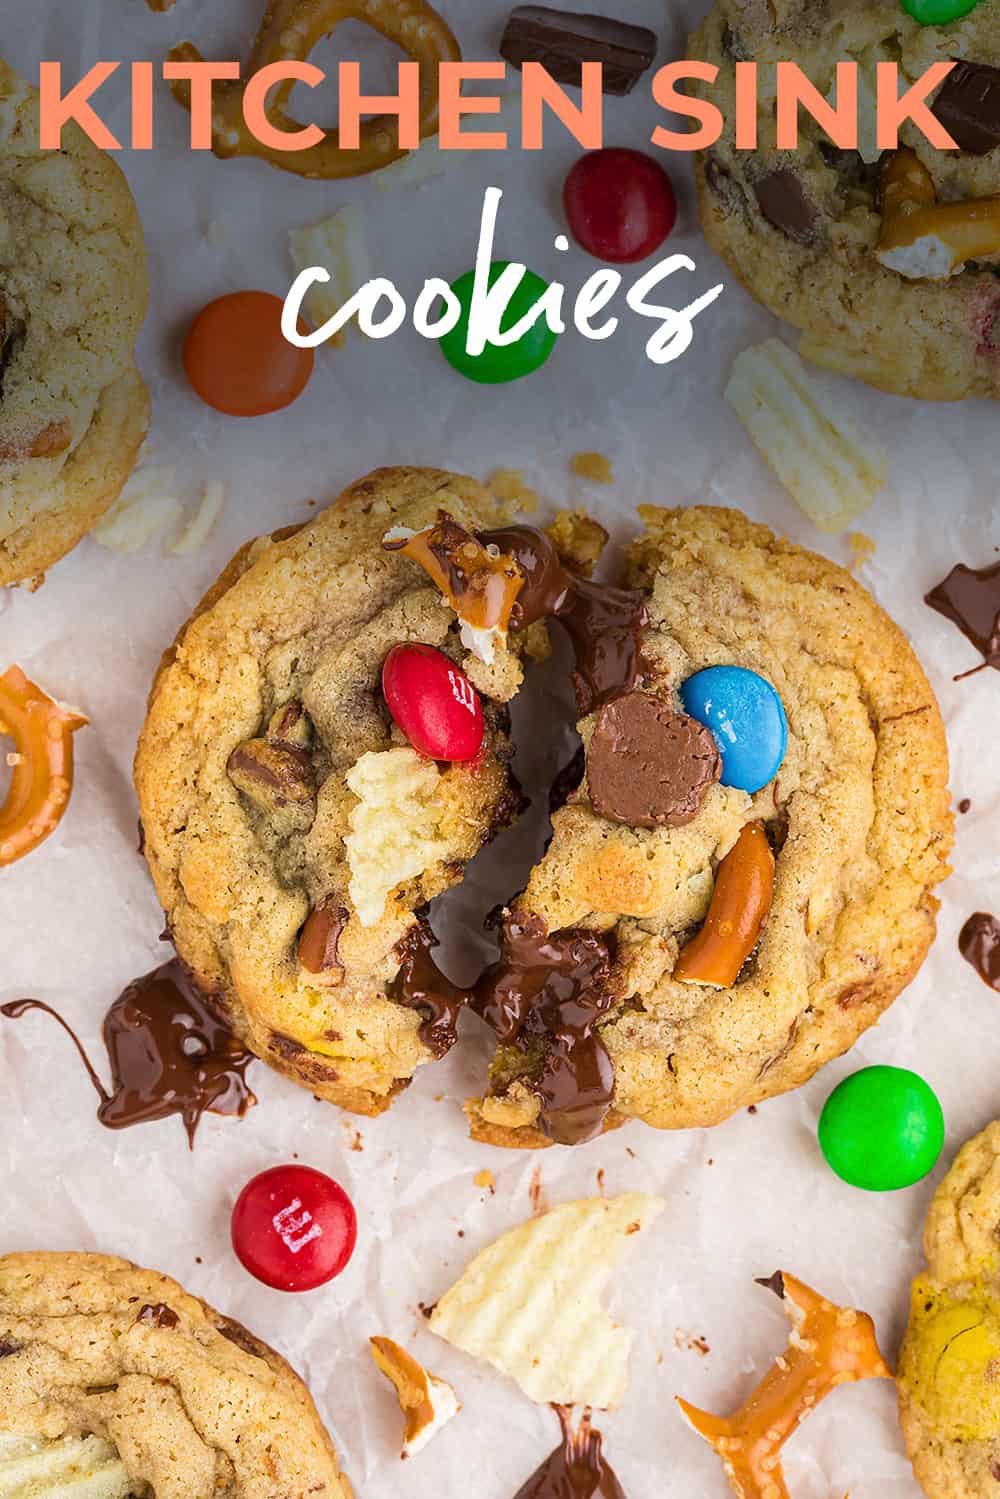 Cookie surrounded by m&ms, chocolate chips, and potato chips.